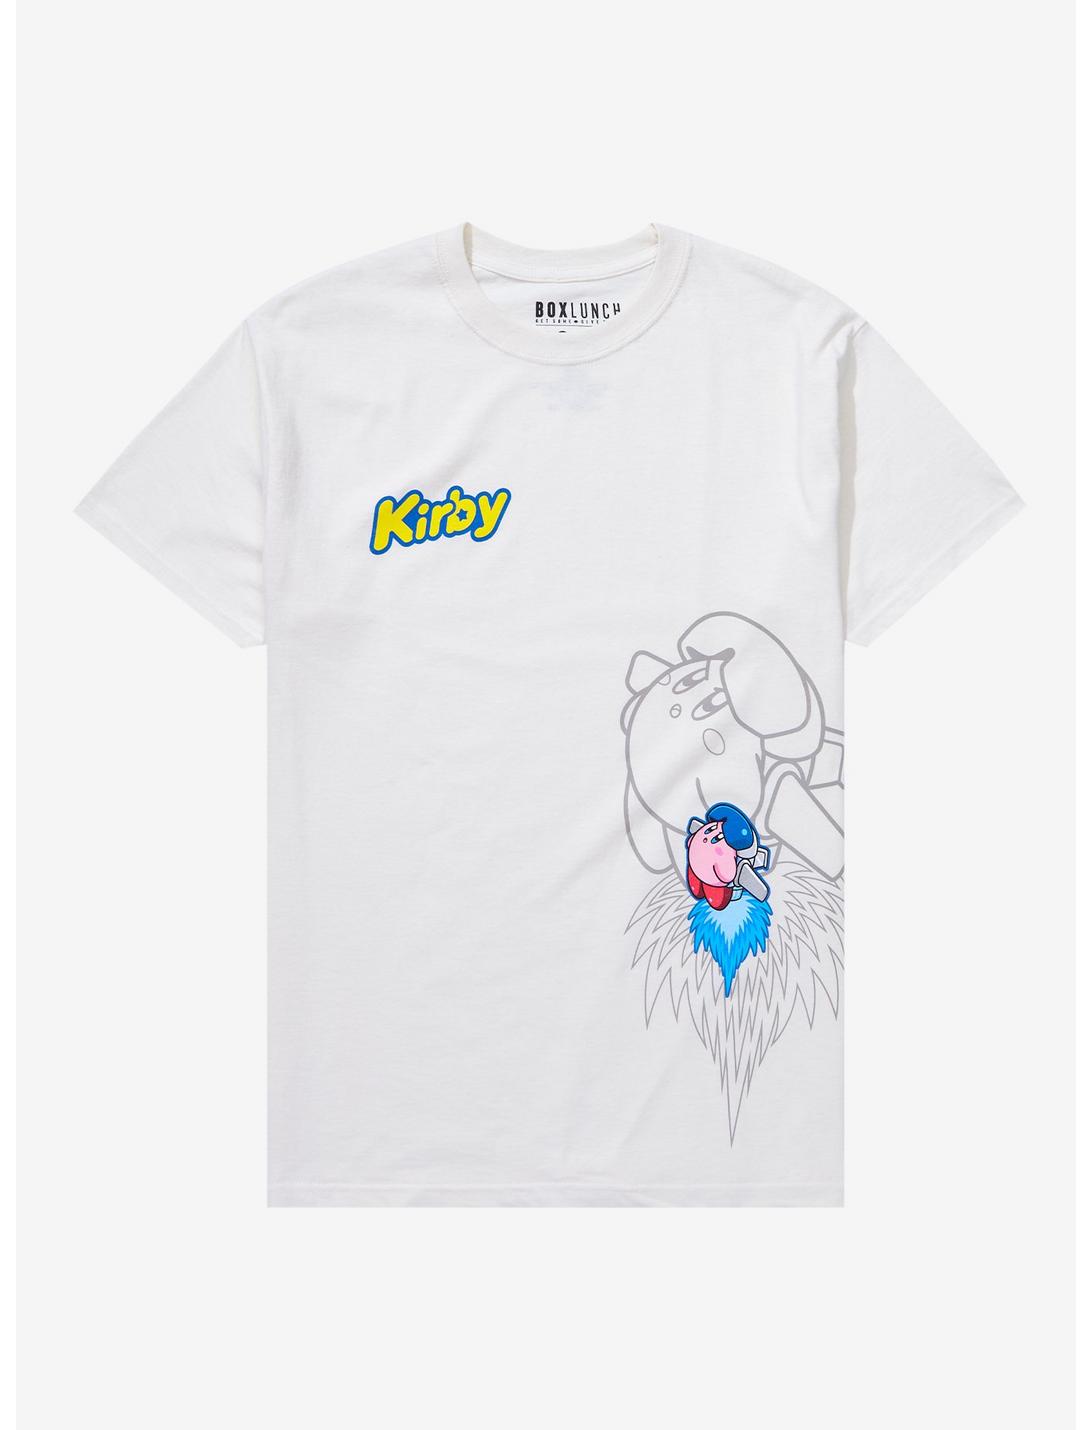 Nintendo Kirby Jetpack Outline T-Shirt - BoxLunch Exclusive | BoxLunch